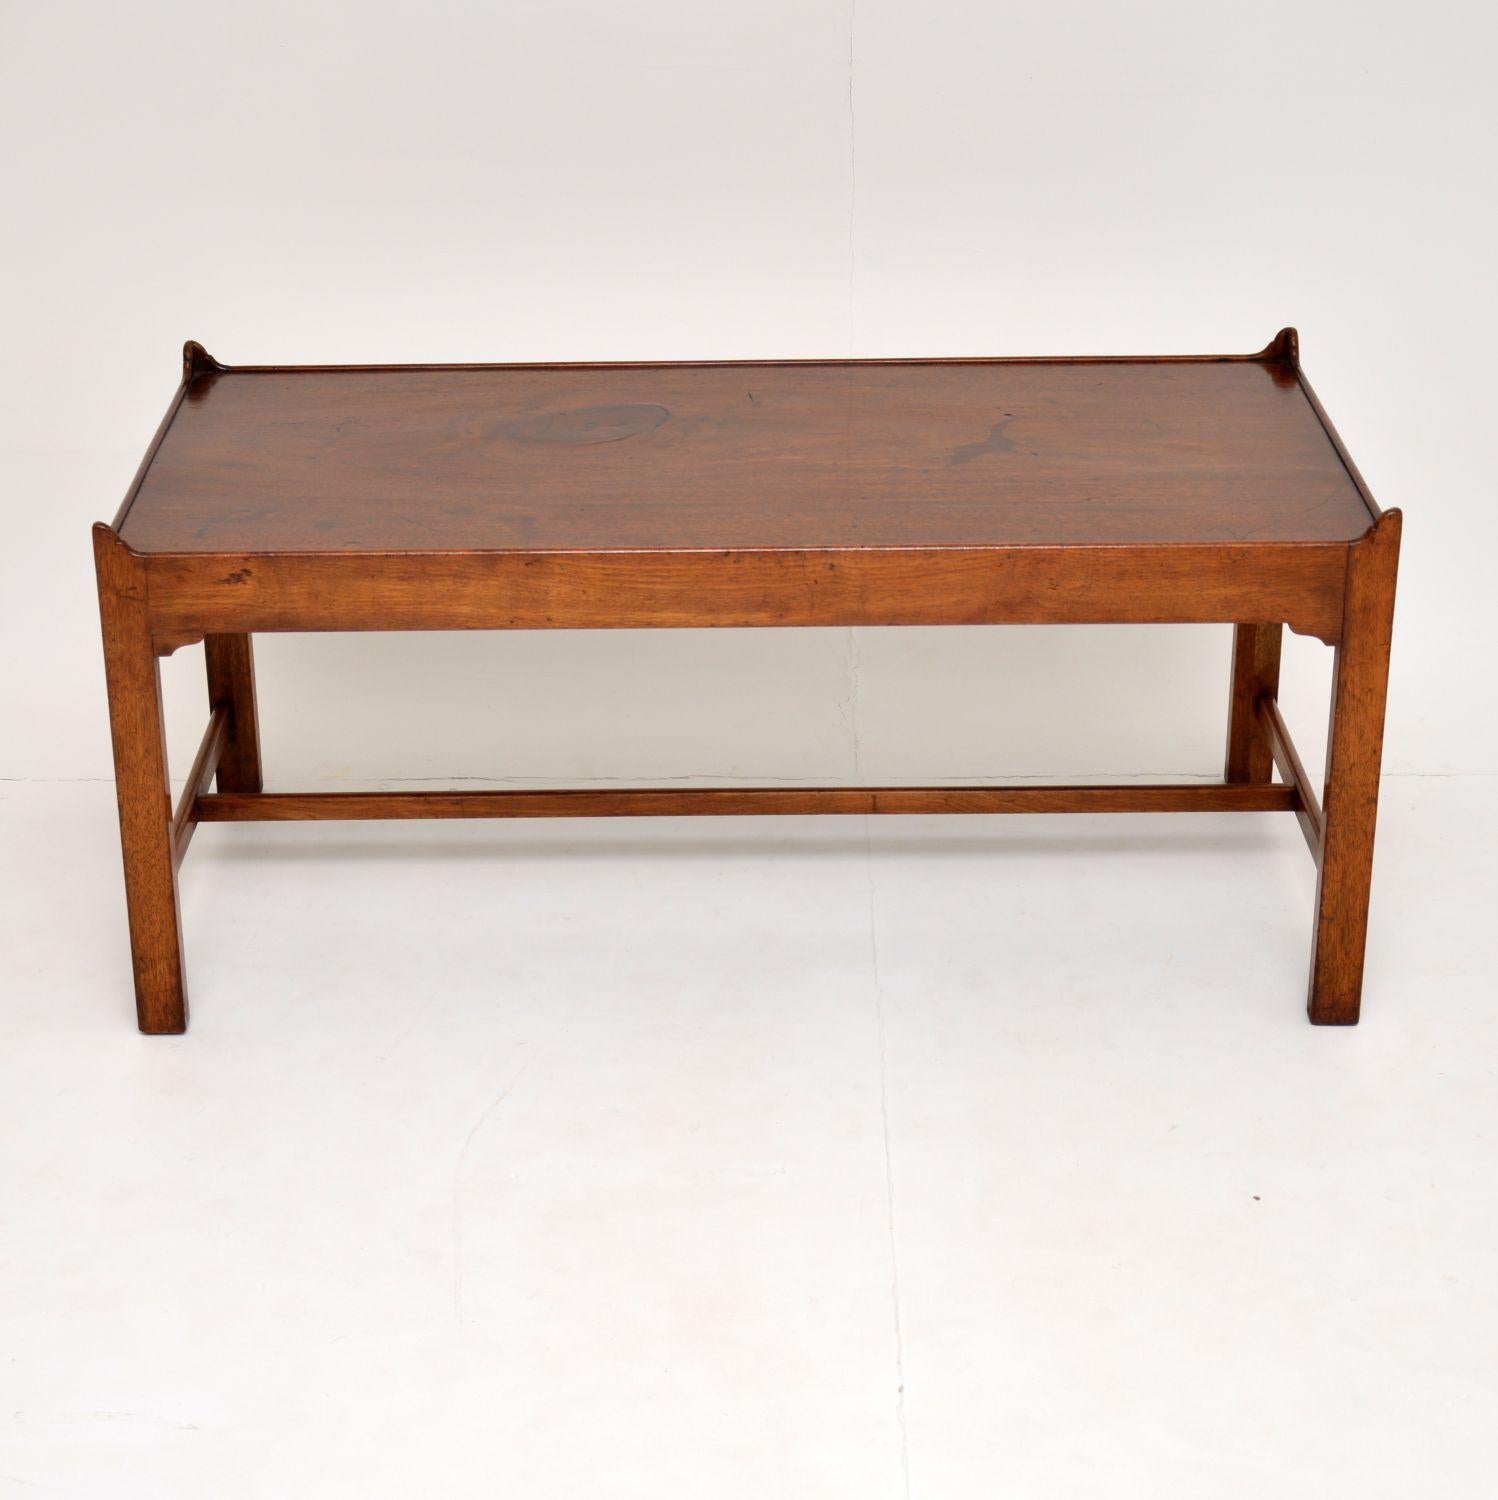 A beautiful and fine looking antique mahogany coffee table, this dates from circa 1900-1910 period.

It is unusual to find coffee tables of this design and age, it is extremely well made. We have had this French polished, it still retains a worn